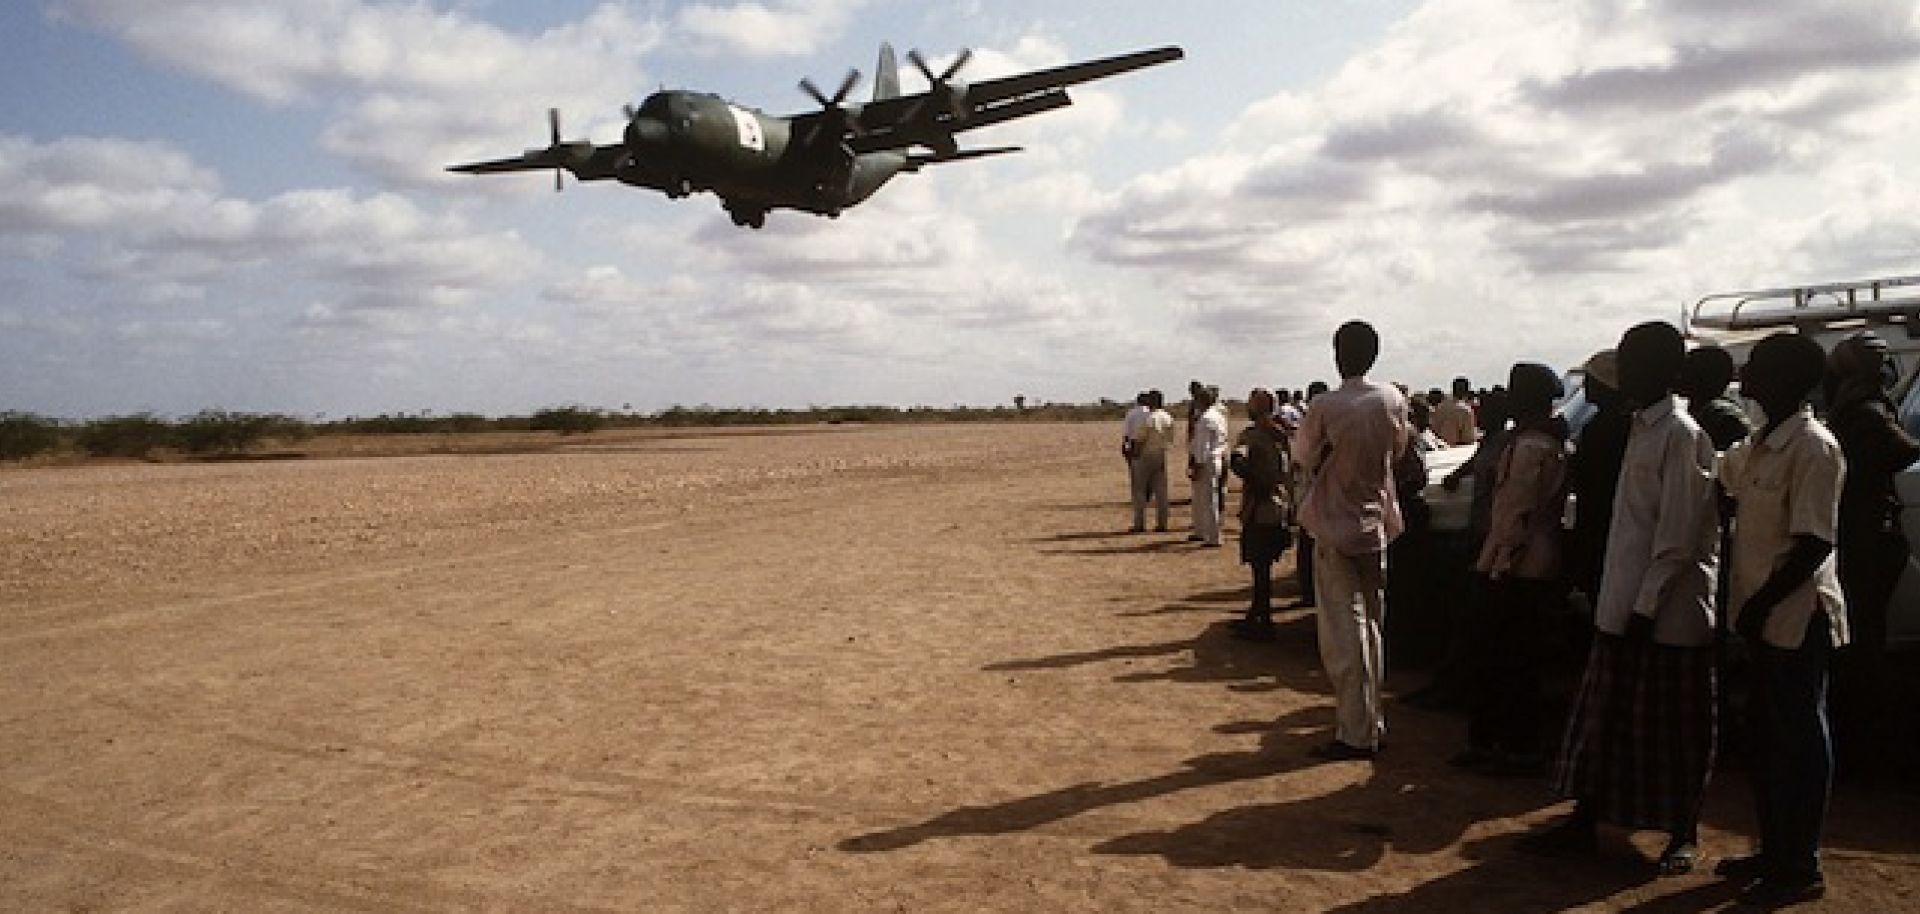 Western countries use their advanced military capabilities to protect interests in Africa. In most cases, especially when time is of the essence in a remote theater, there is no alternative to air transport.